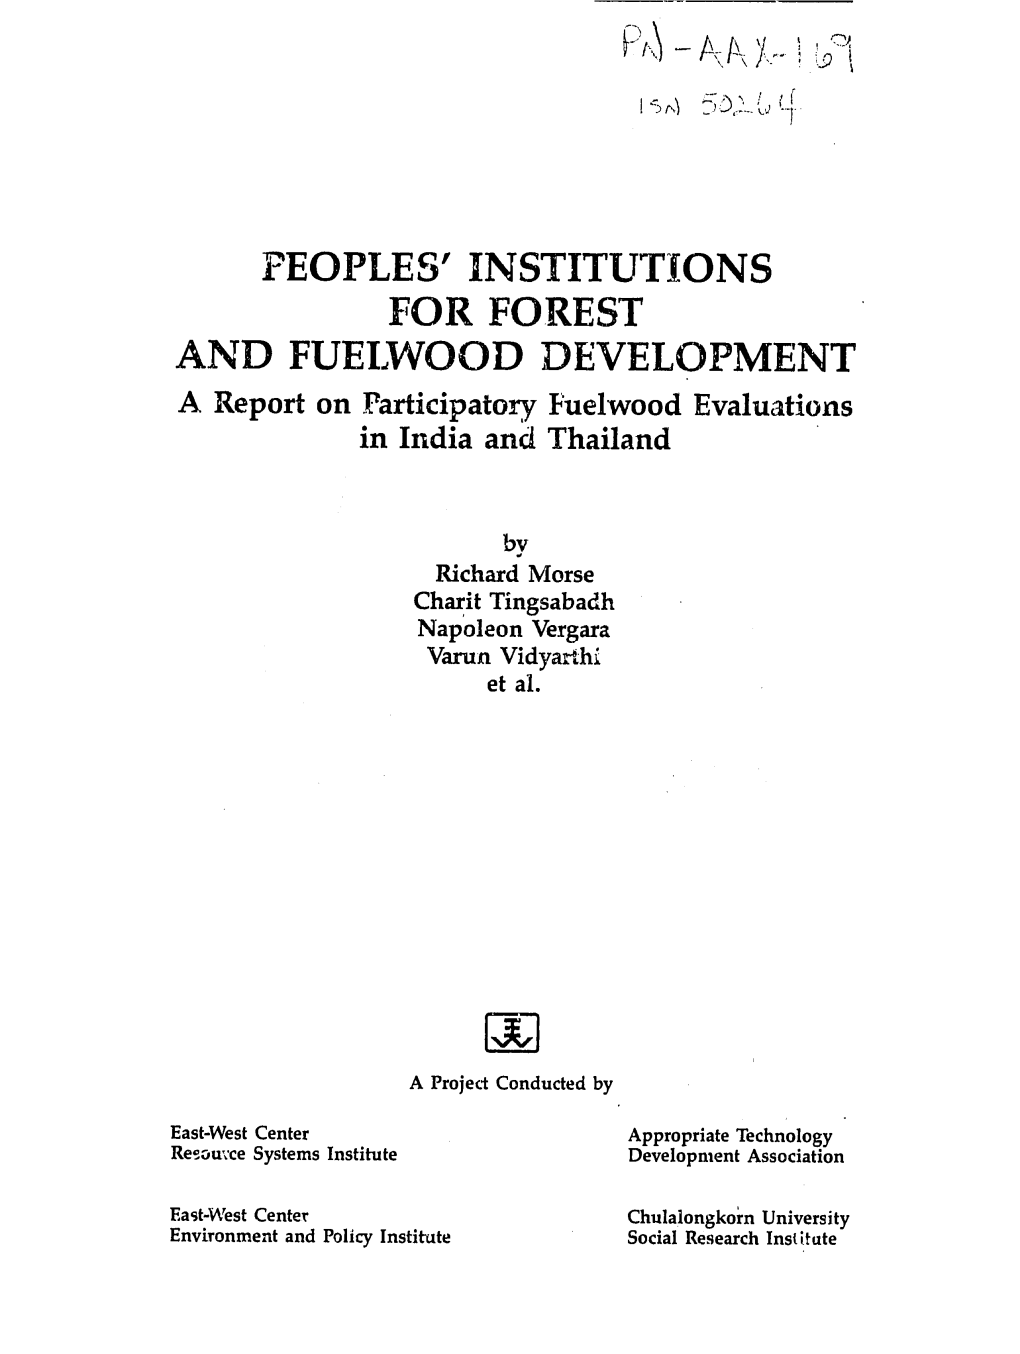 PEOPLES' INSTITUTIONS for FOREST and FUELWOOD DEVELOPMENT a Report on Participatory Fuelwood Evaluations in India and Thailand